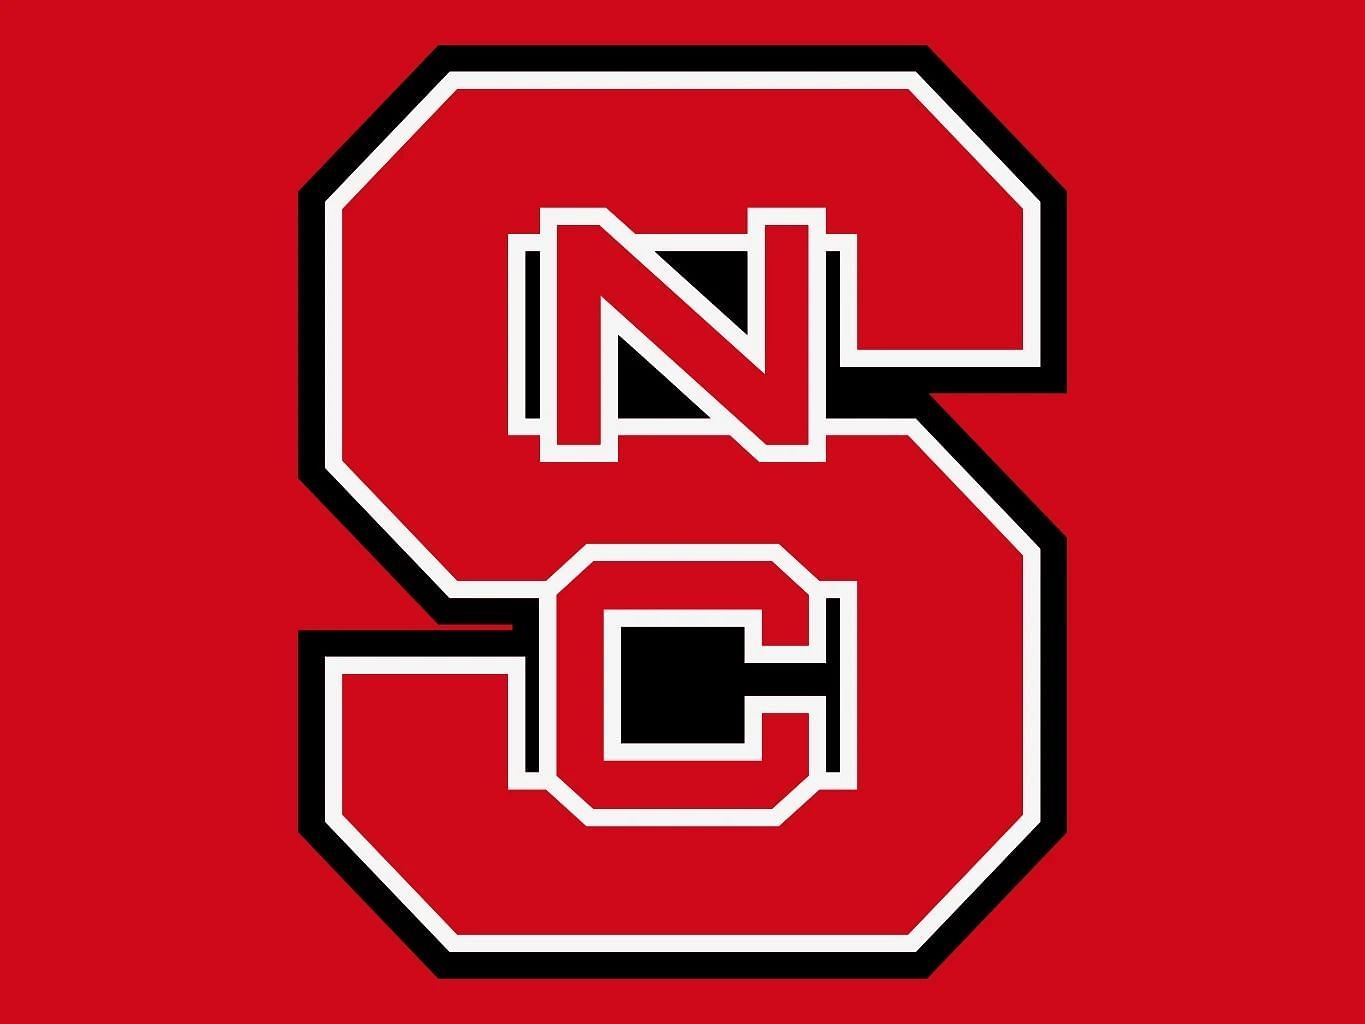 NC State Wolfpack Football